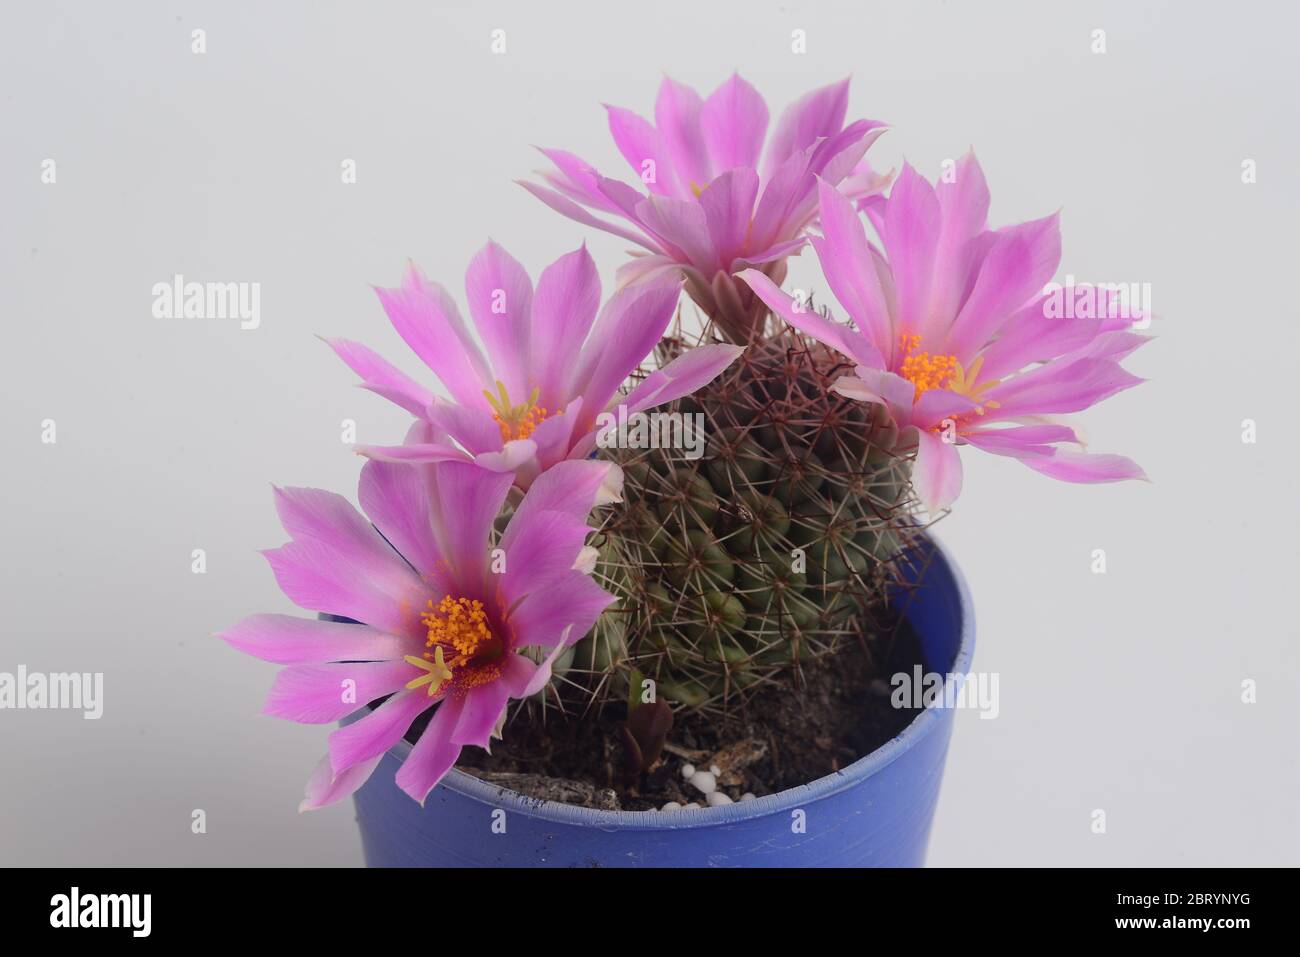 Blooming pink  flower of Mammillaria schumannii  cactus on  white  background with copy space for text Stock Photo